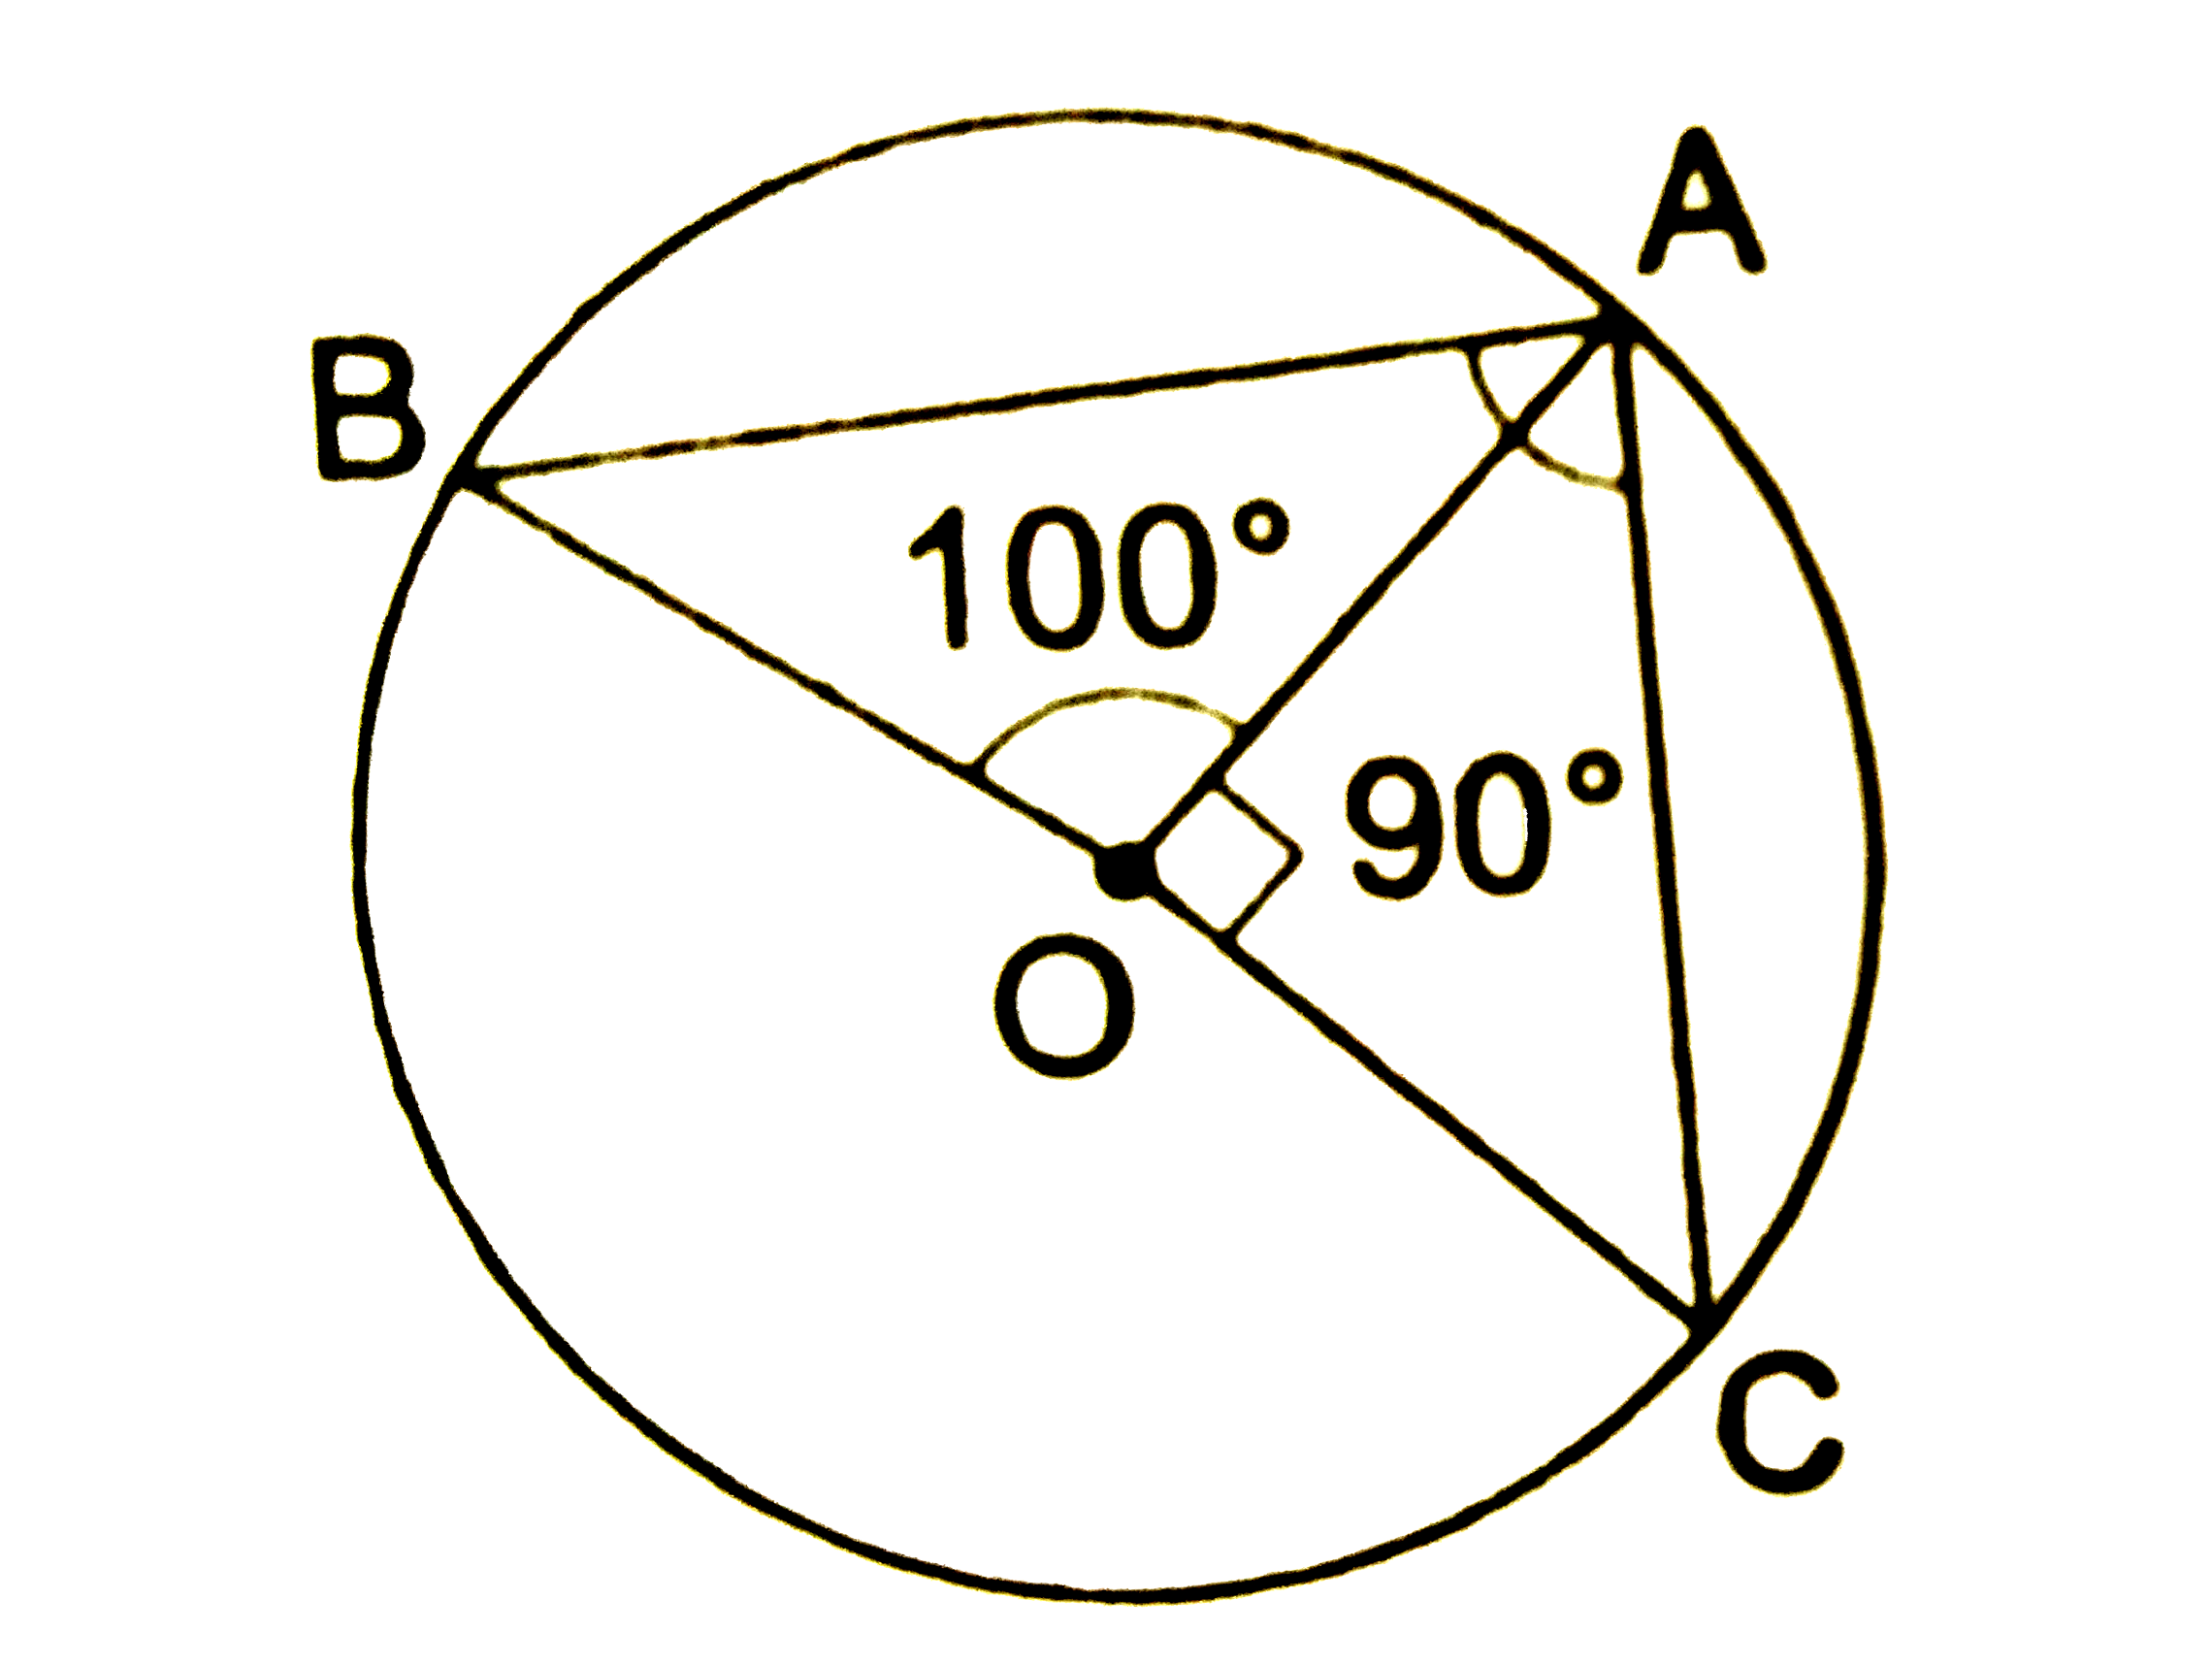 In the given figure, O is the centre of a circle. If / AOB = 100^(@) and / AOC = 90^(@) then / BAC = ?